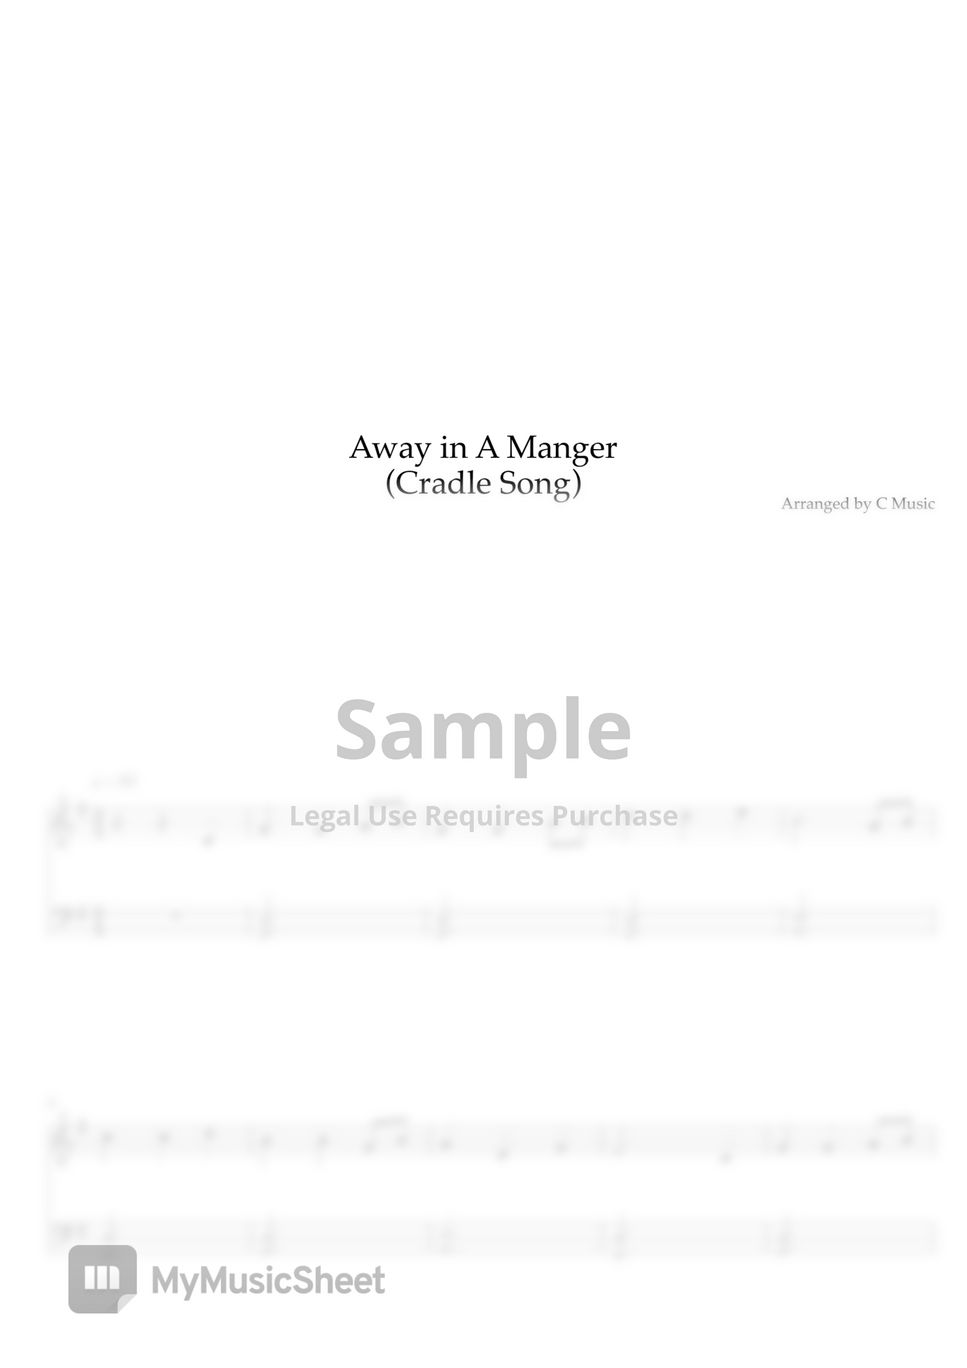 Traditional Carol - Away in a Manger (Cradle Song) (Easy Version) by C Music